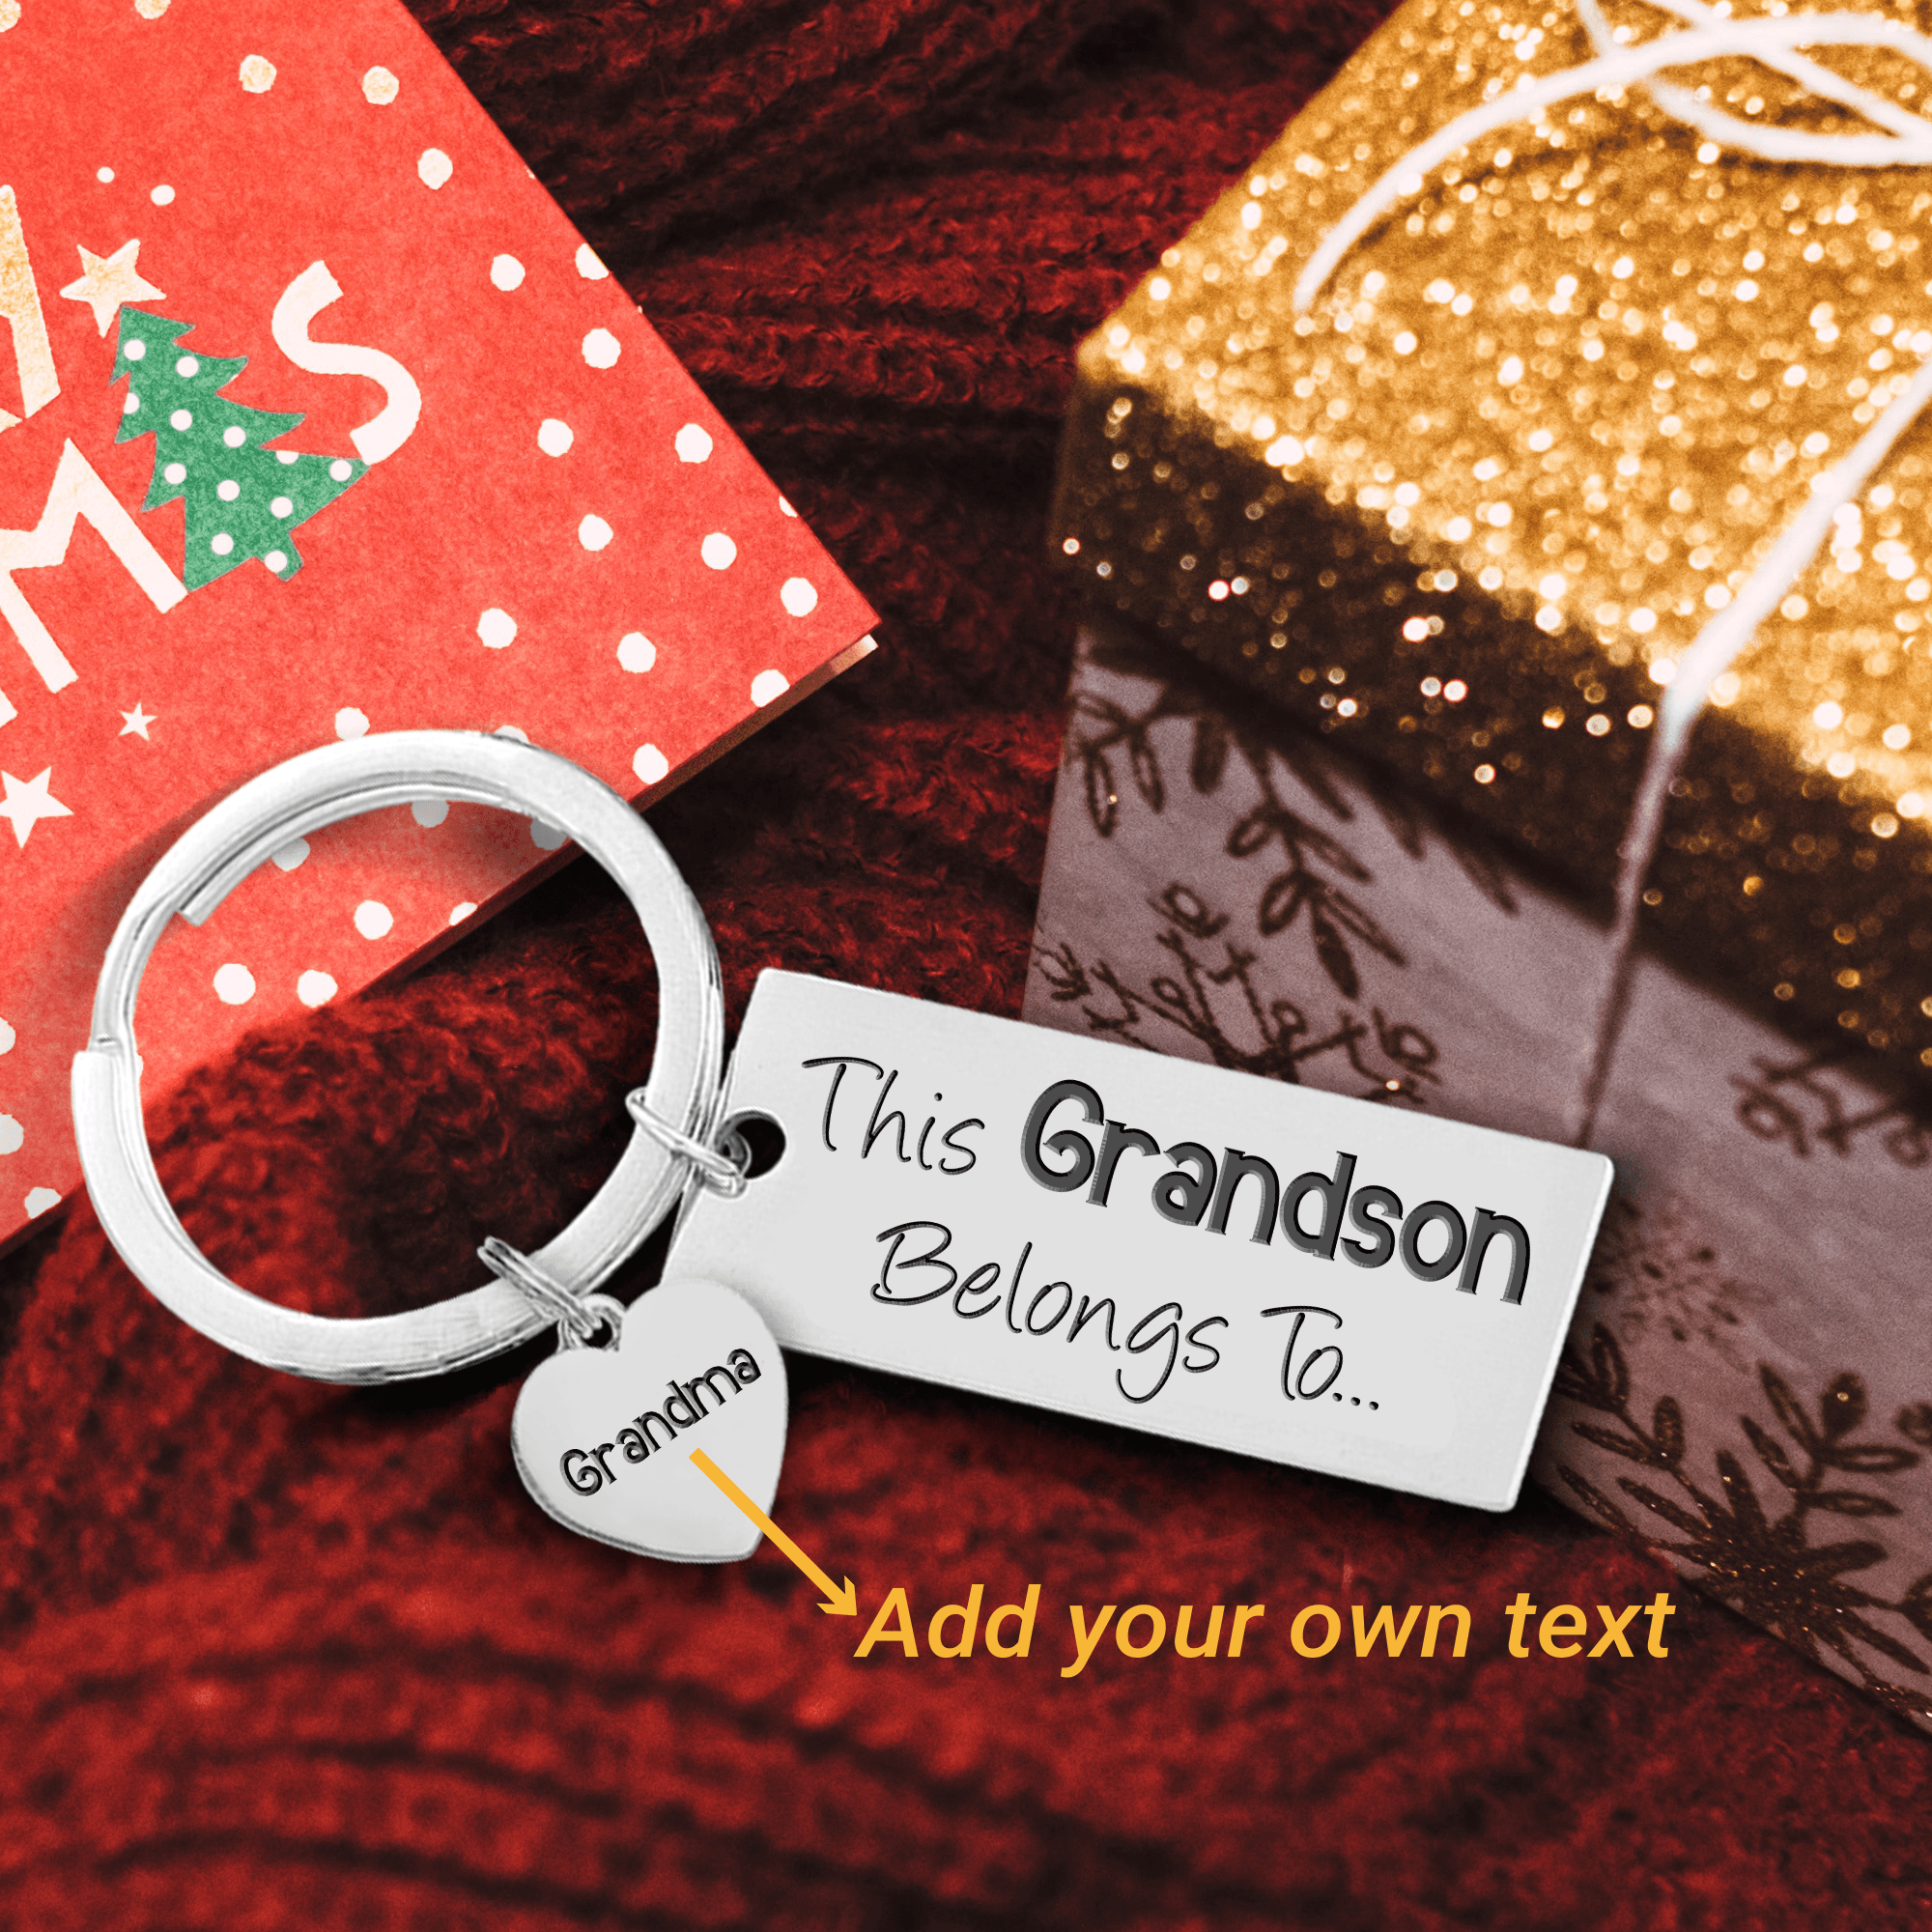 Personalized Engraved Keychain - Family - To My Grandson - I Love You - Augkc22001 - Gifts Holder